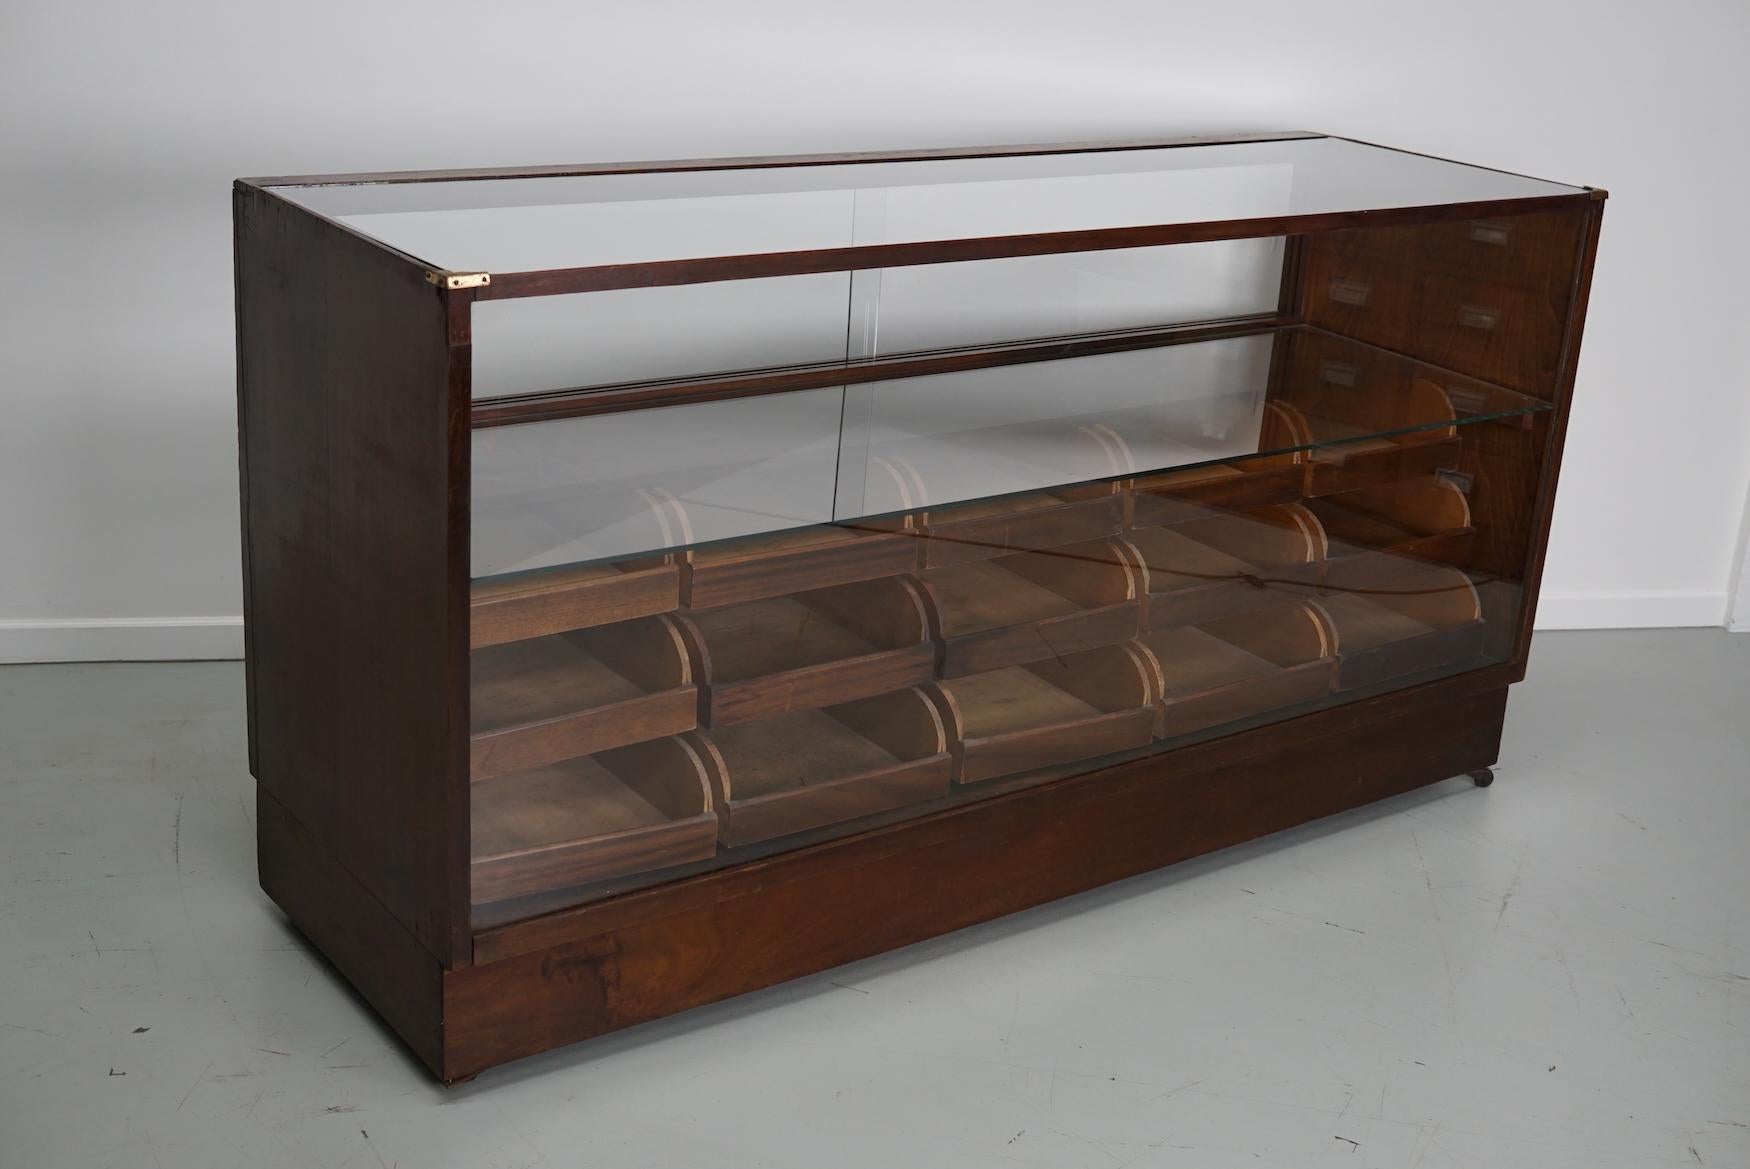 This vintage mahogany haberdashery shop counter dates from the 1940s and was made in England. It features a solid frame with veneered sides, glass casing and drawers in mahogany with copper handles. The drawers measure +- DWH 38 / 43 / 48 x 31 x 40